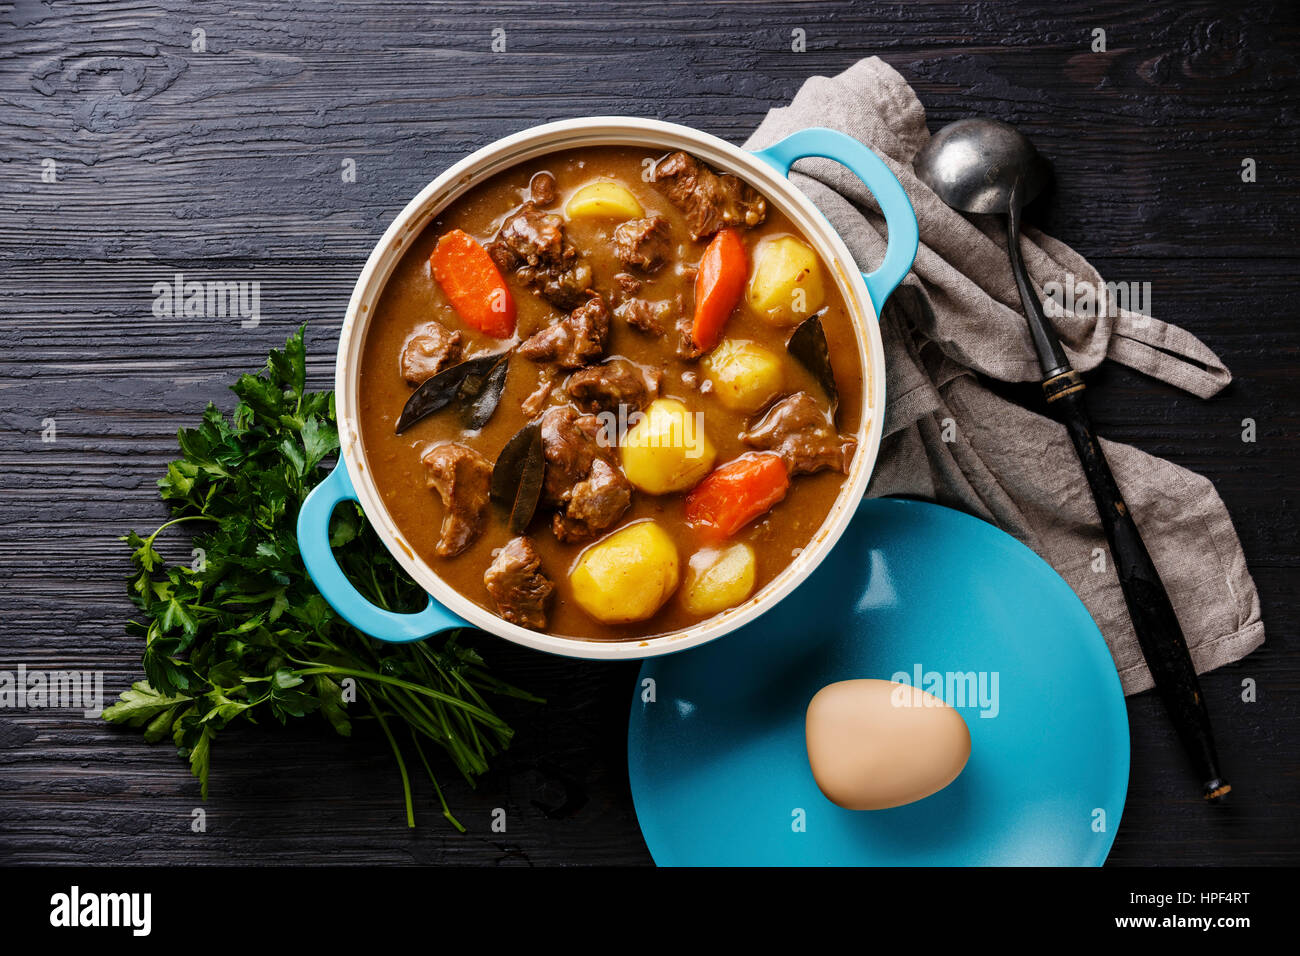 Beef meat stewed with potatoes, carrots and spices in cast iron pan on burned black wooden background Stock Photo